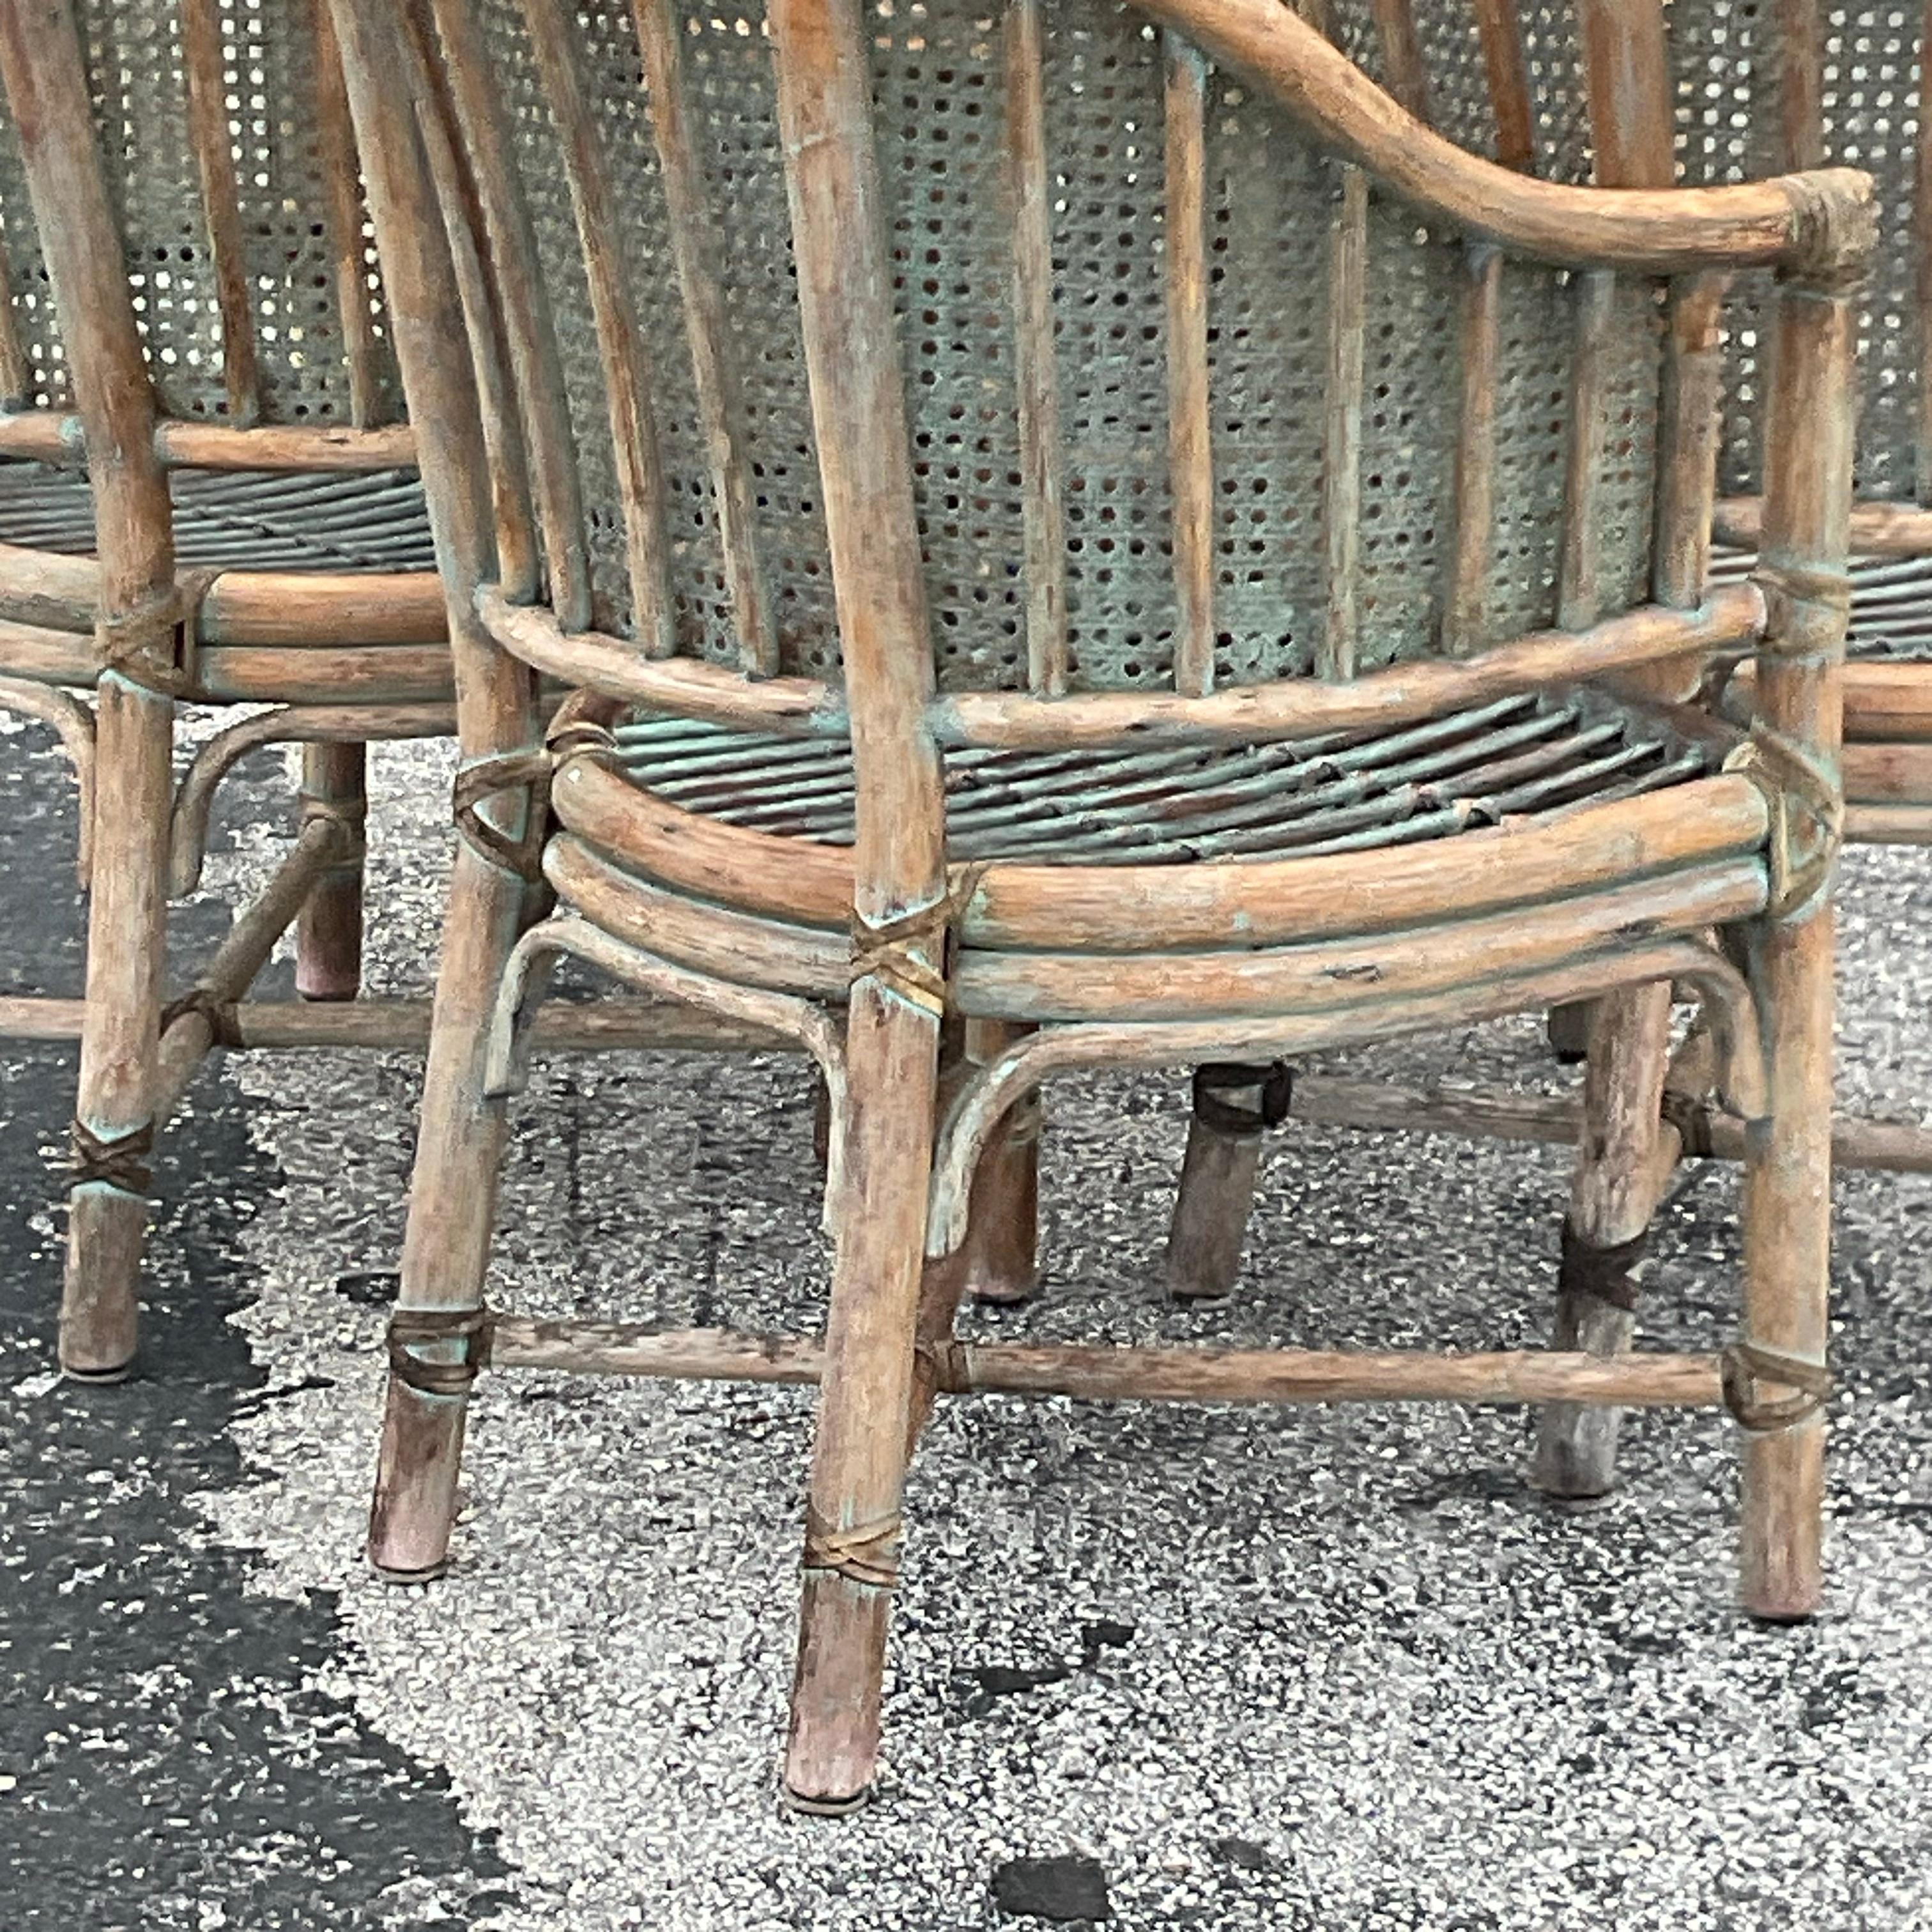 Transform your dining space with our Vintage Coastal Patinated Bent Rattan Cane Dining Chairs - Set of 4. Crafted in the USA, these chairs blend coastal charm with American craftsmanship, offering a perfect balance of style and comfort for